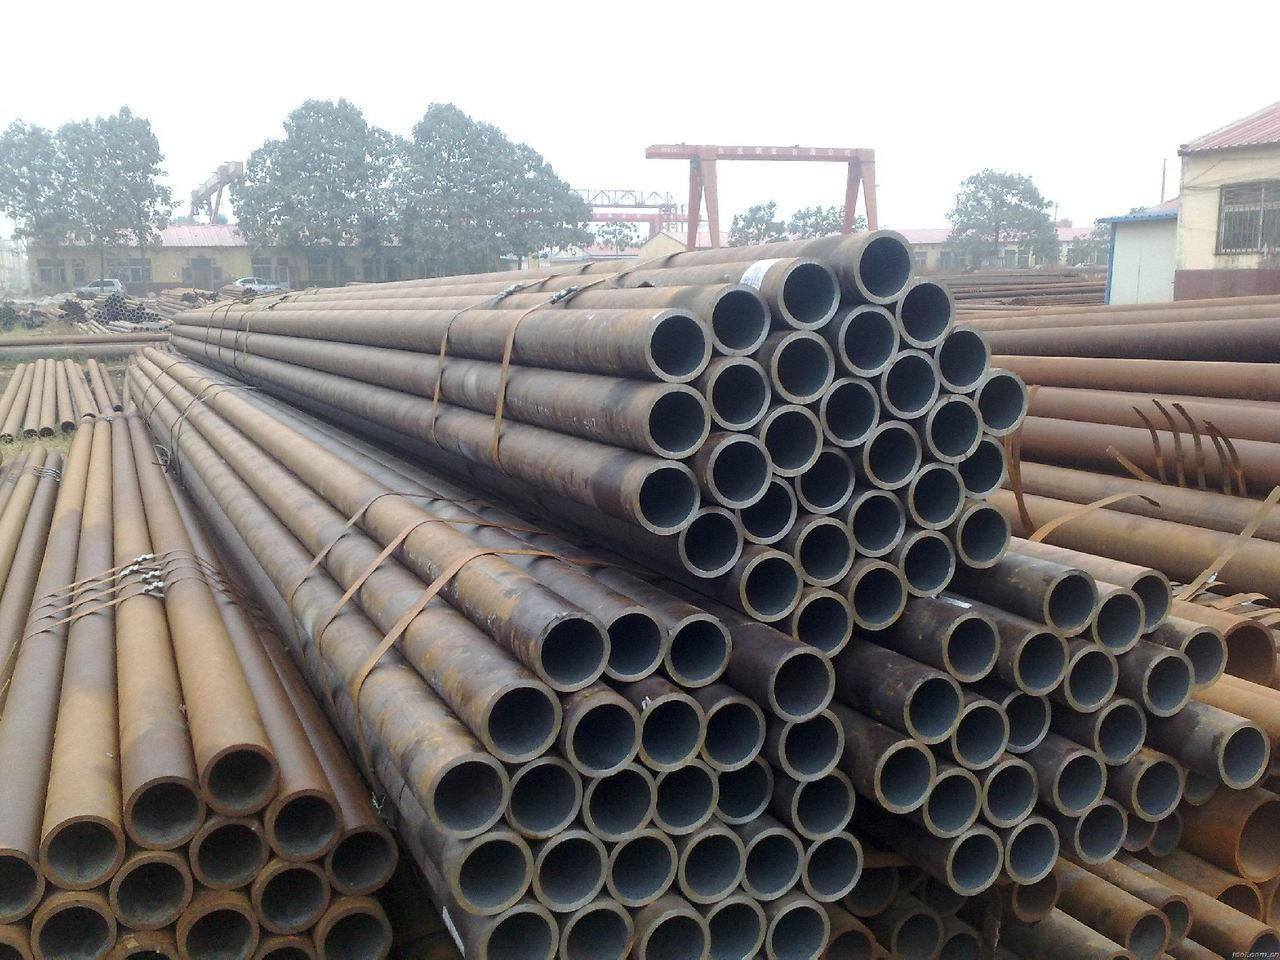 Domestic steel market rises mainly